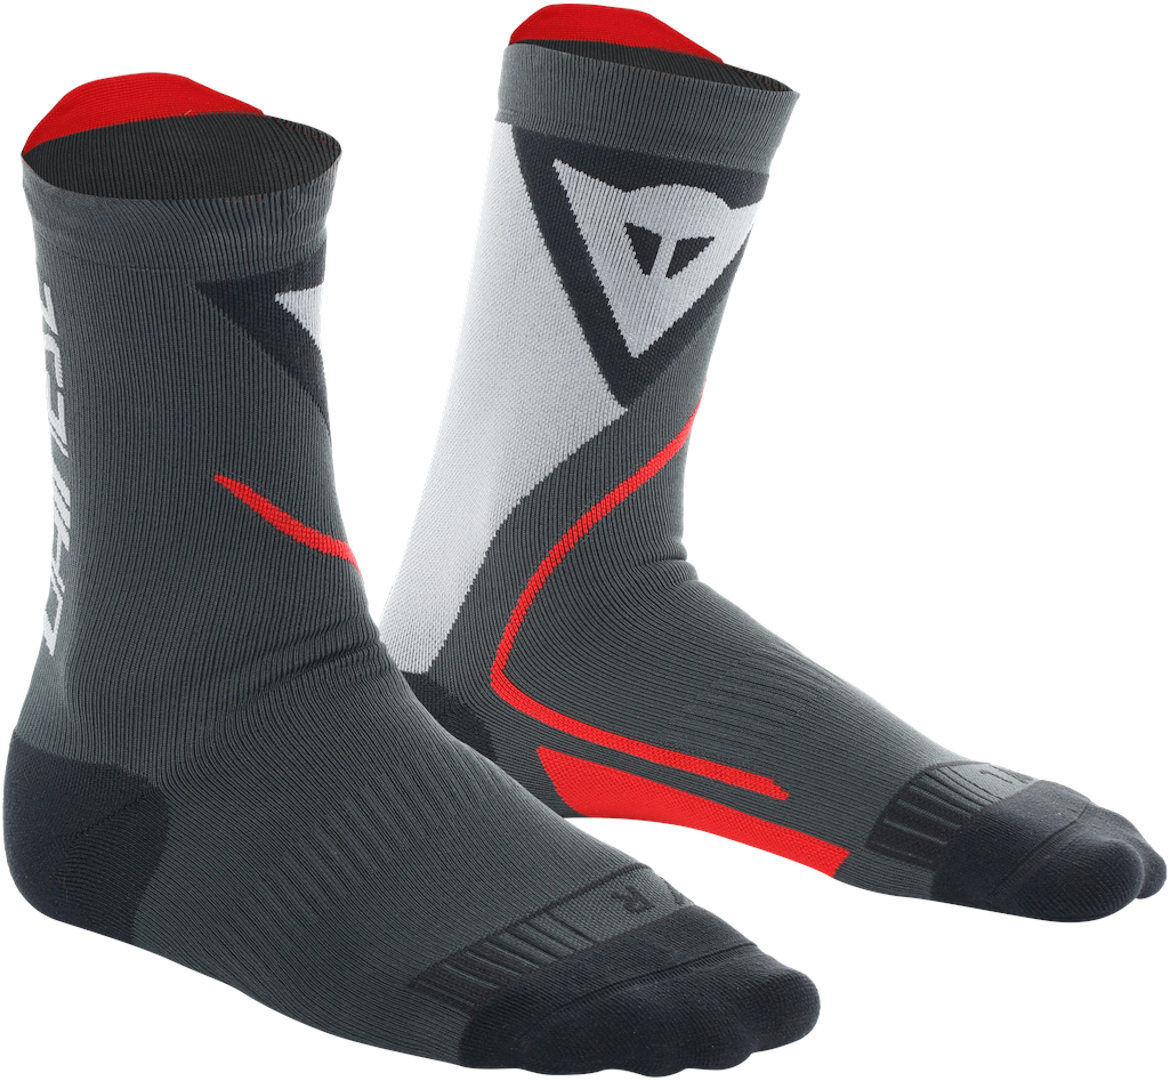 Dainese Thermo Mid Calcetines - Negro Gris Rojo (45 46 47)